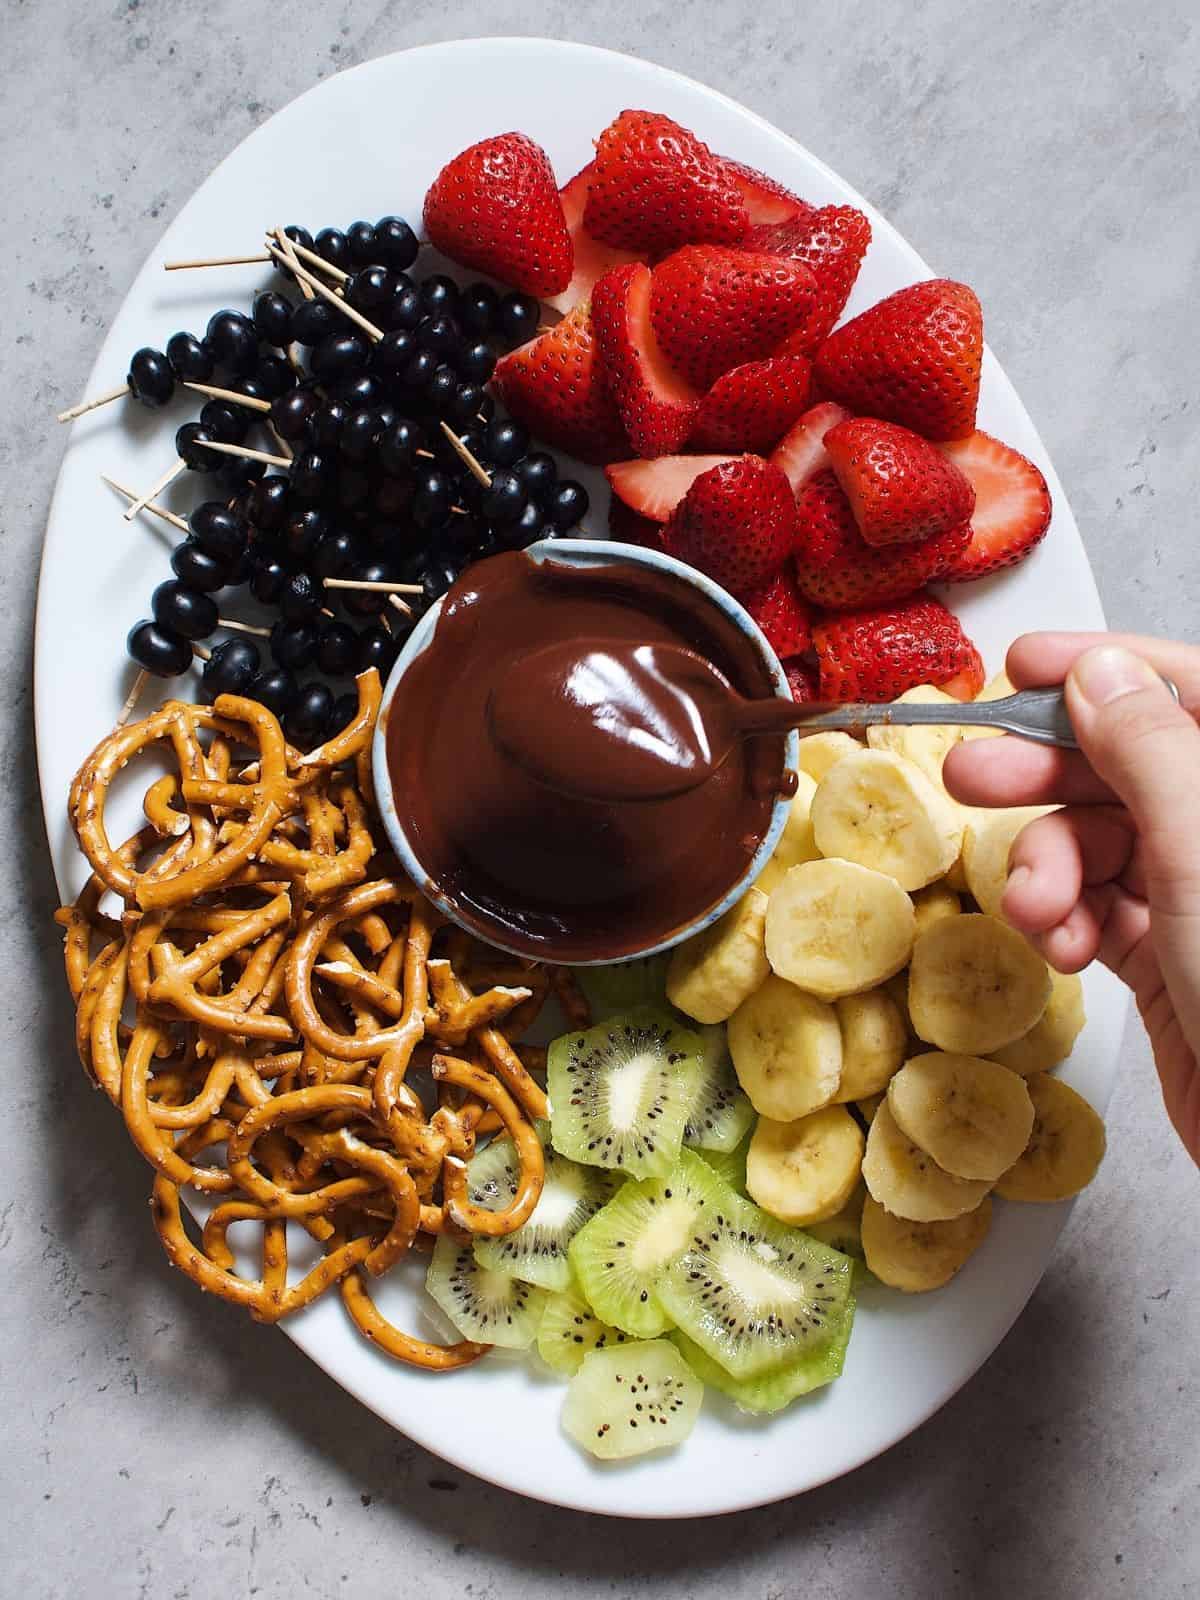 chocolate dipping sauce on a platter with fruit and pretzels.